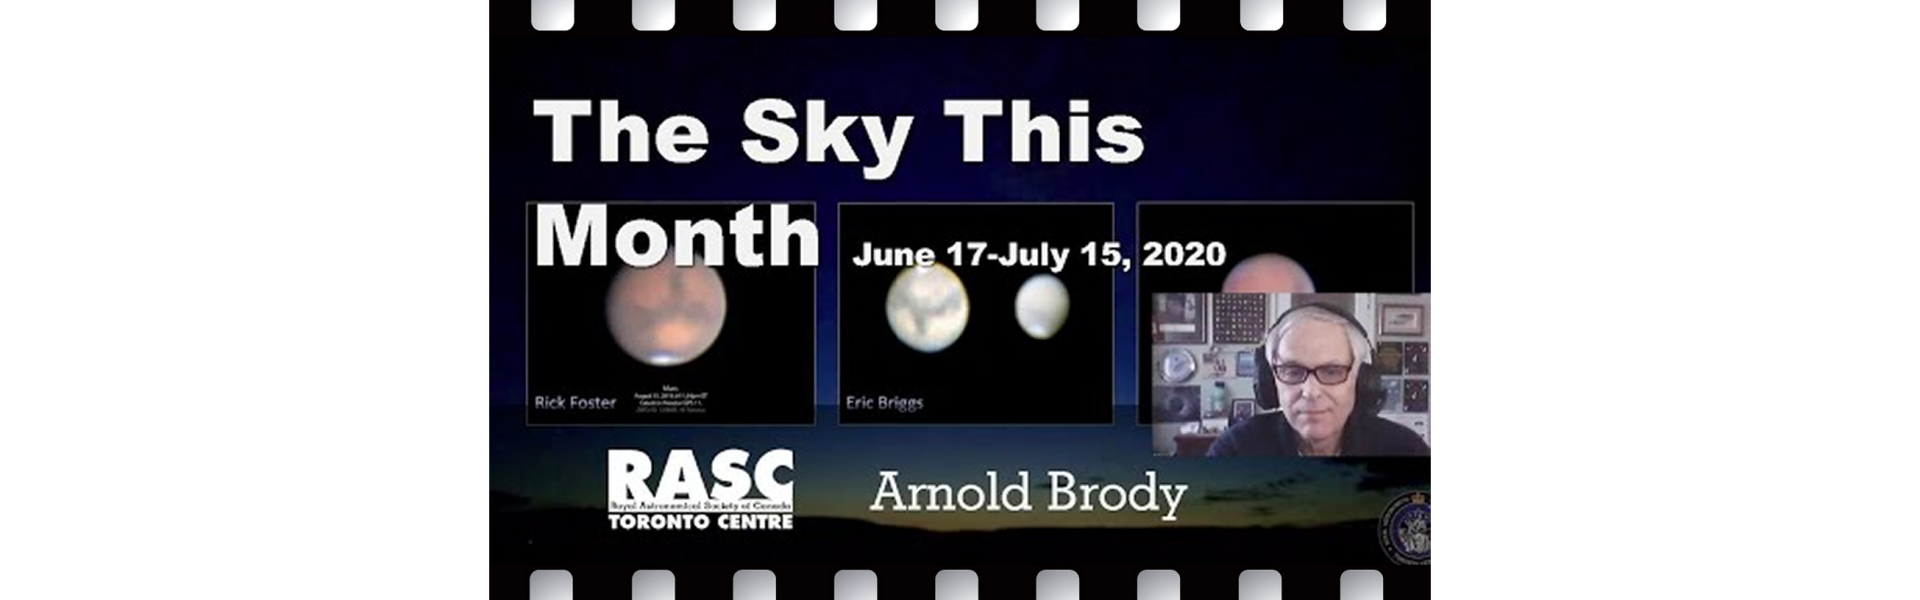 The Sky This Month for June 17 - July 15, 2020